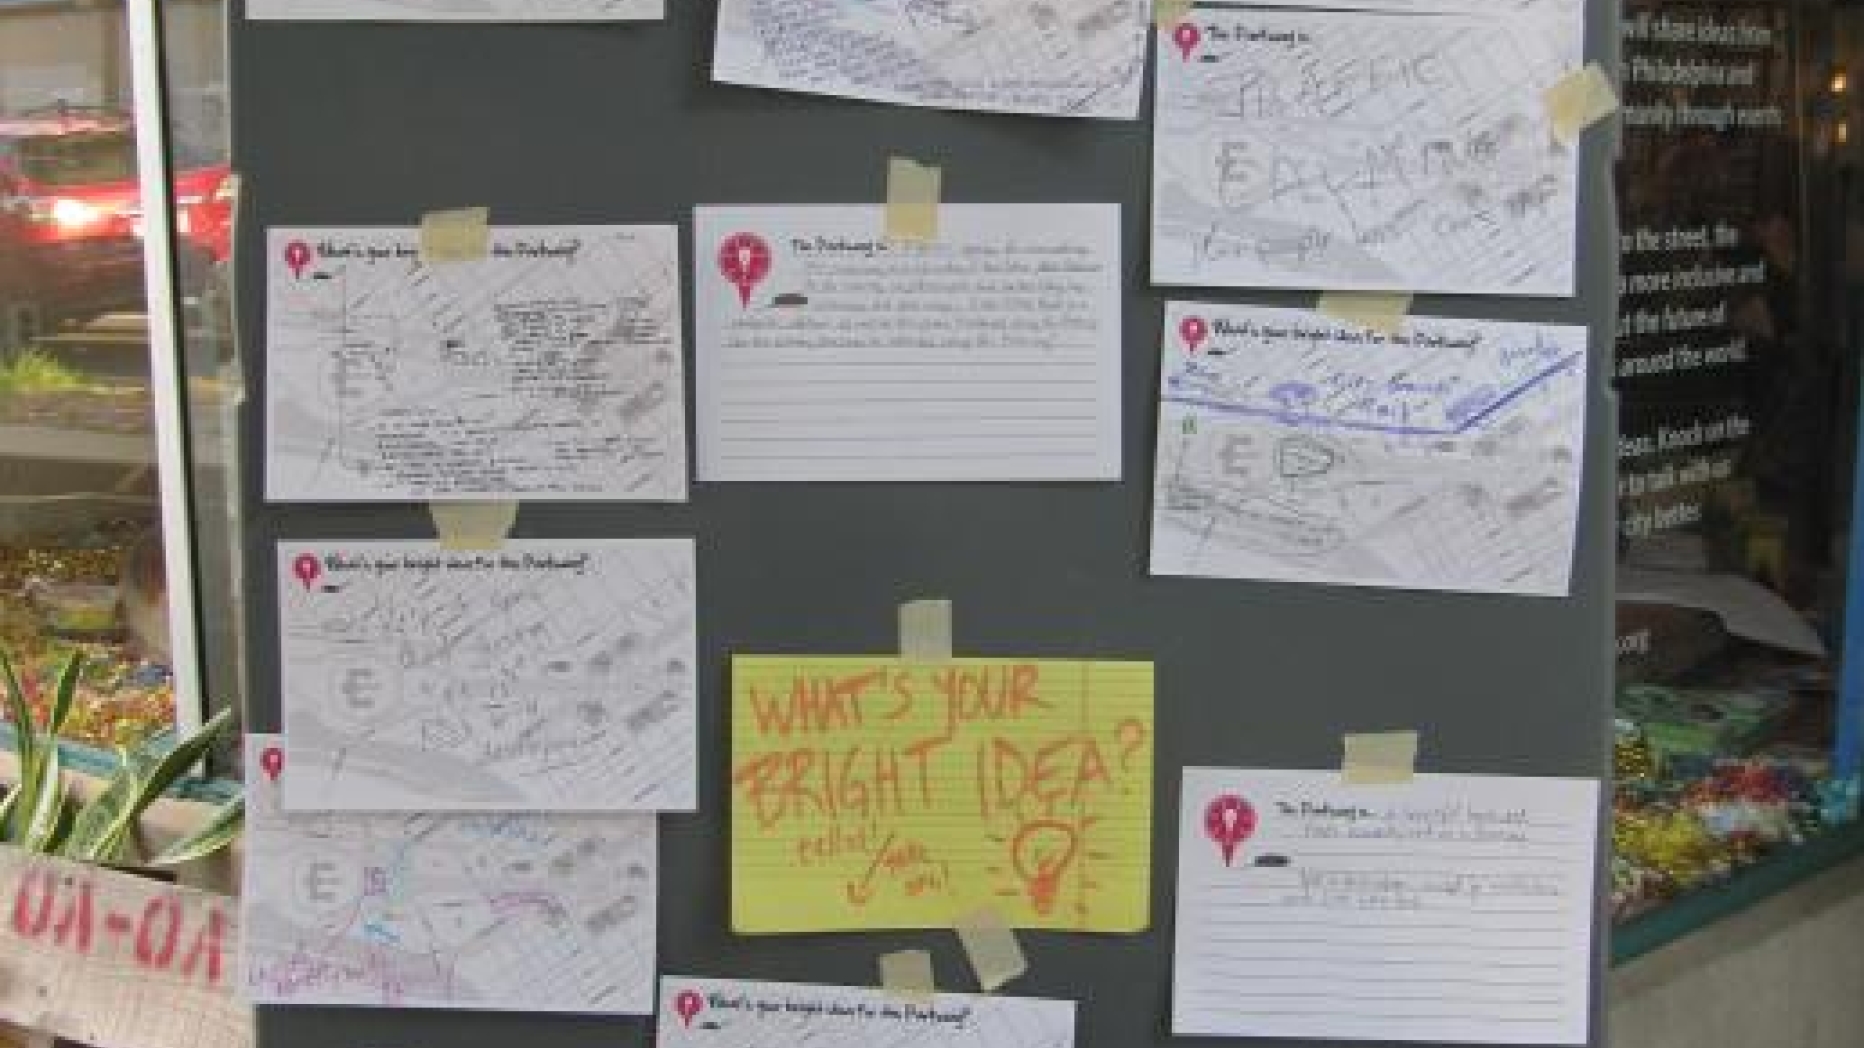 Board where anyone from the public can post ideas for redesigning the Parkway. There are many ideas posted.